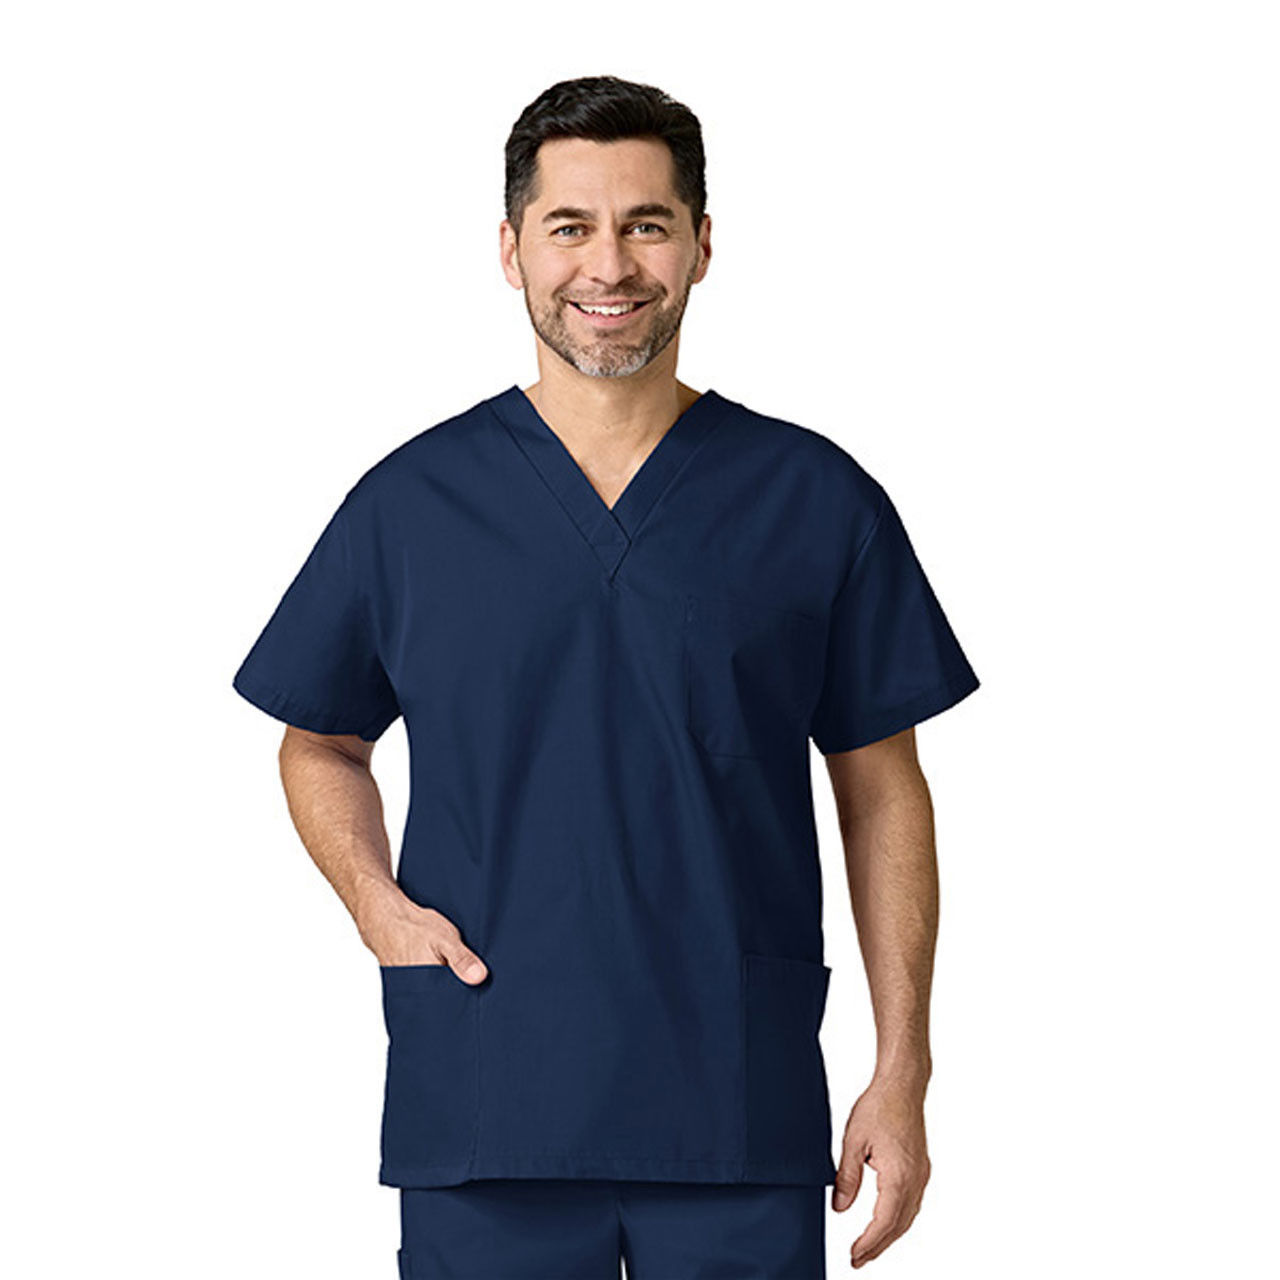 Can the Navy Blue Scrub Top withstand many washes and wears without fading or shrinking?